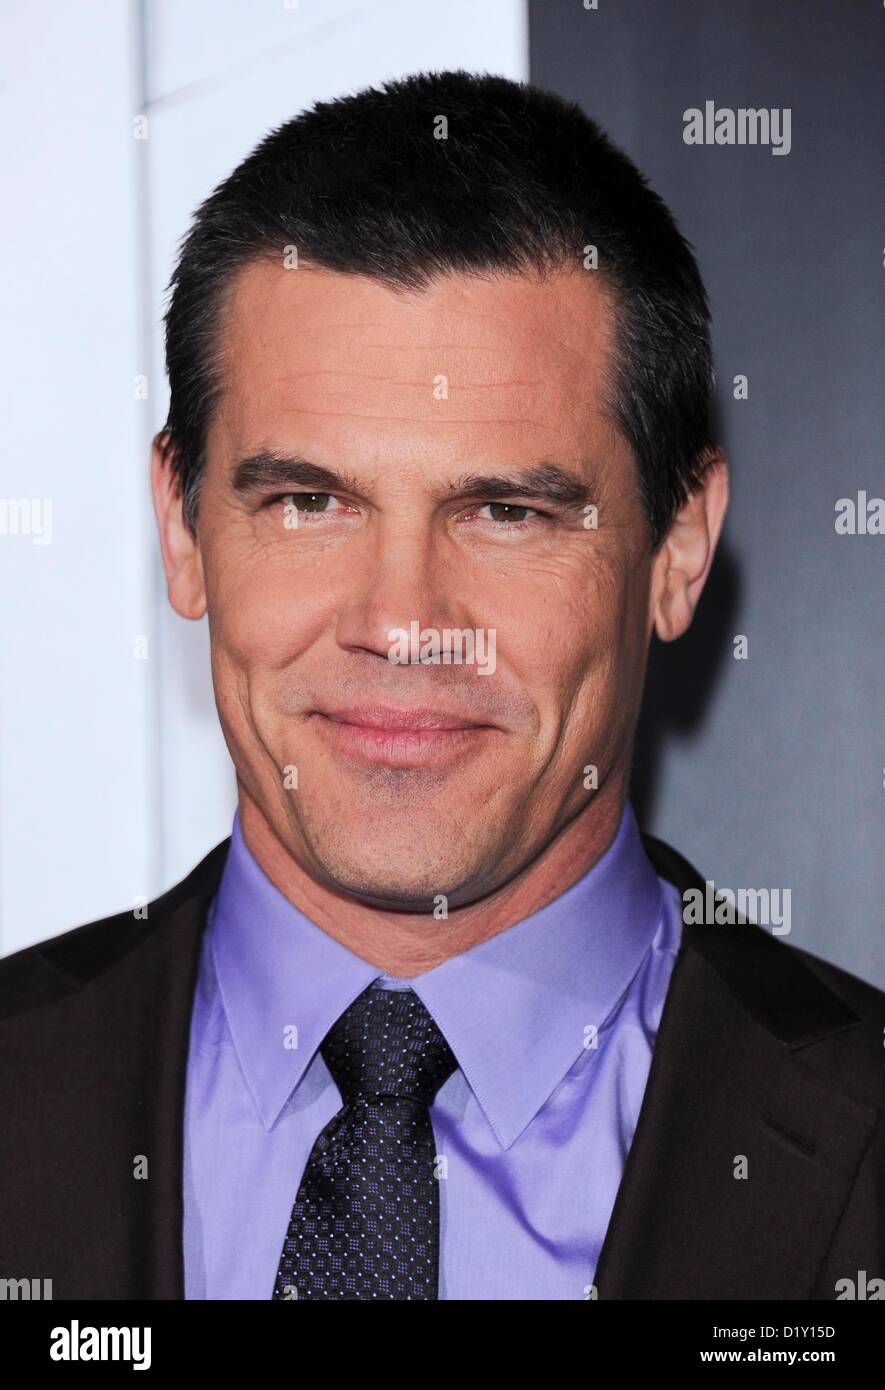 Actor Josh Brolin arrives at the film premiere for 